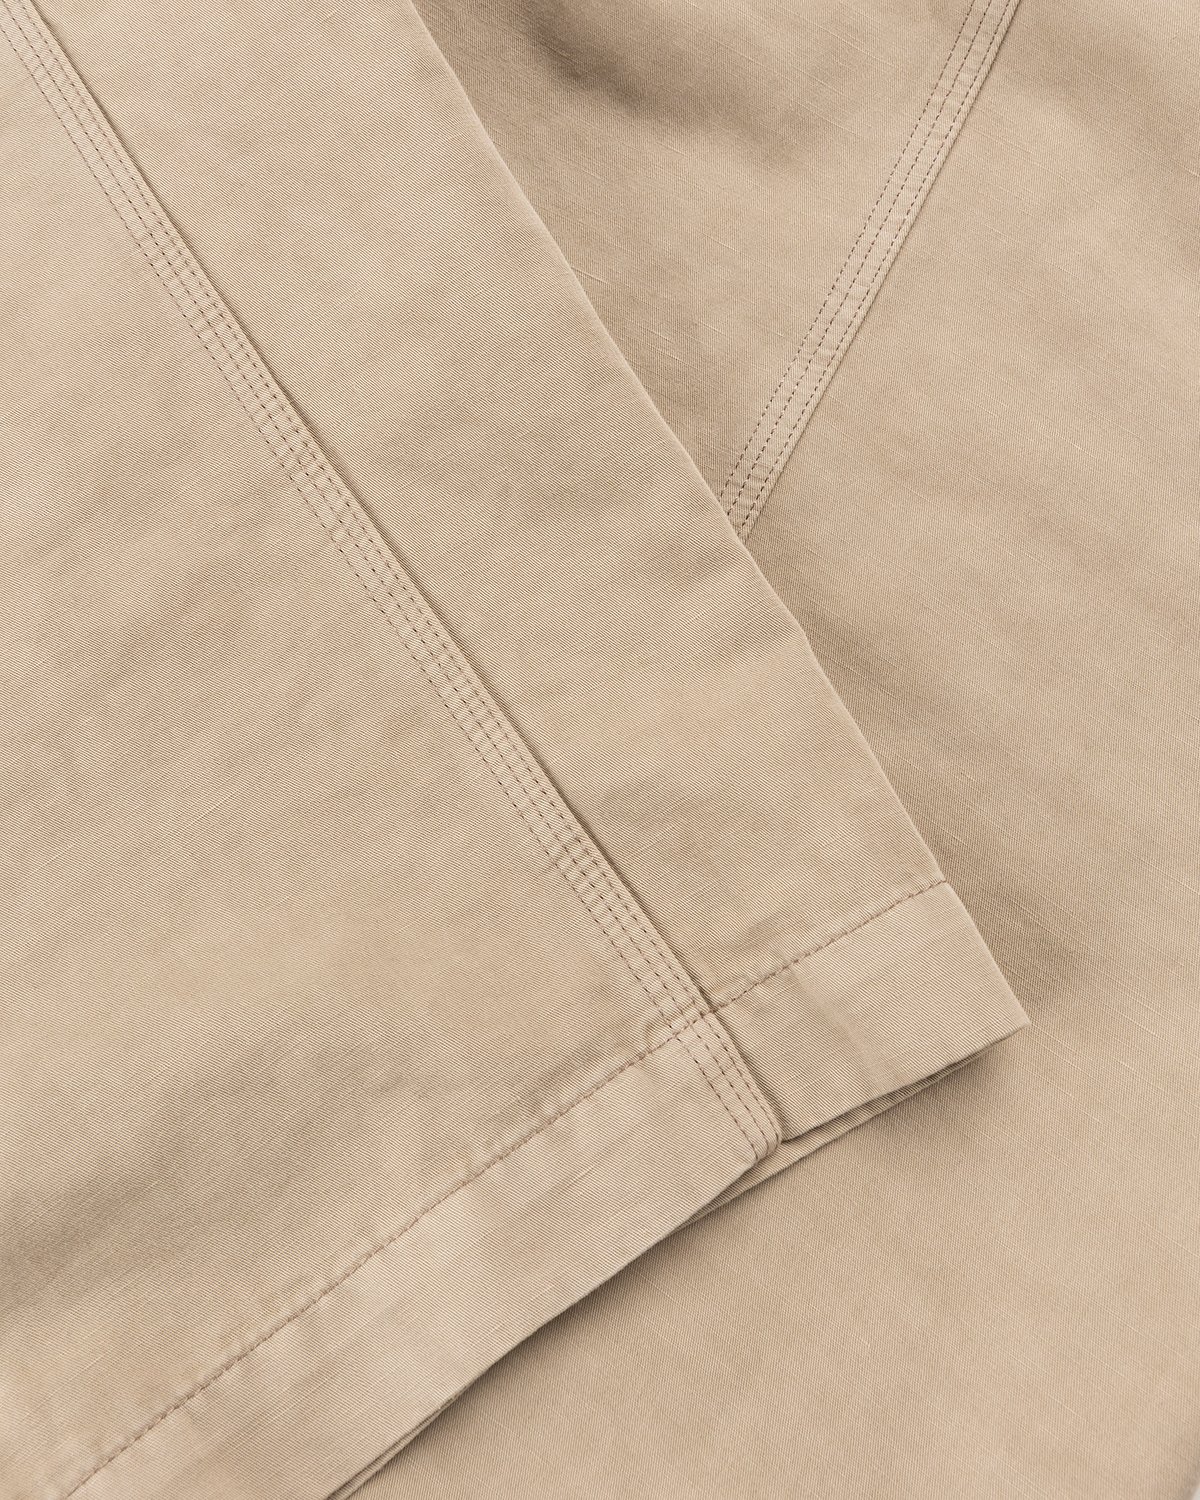 Lemaire - Fatigue Pants Natural Beige - Clothing - Beige - Image 6